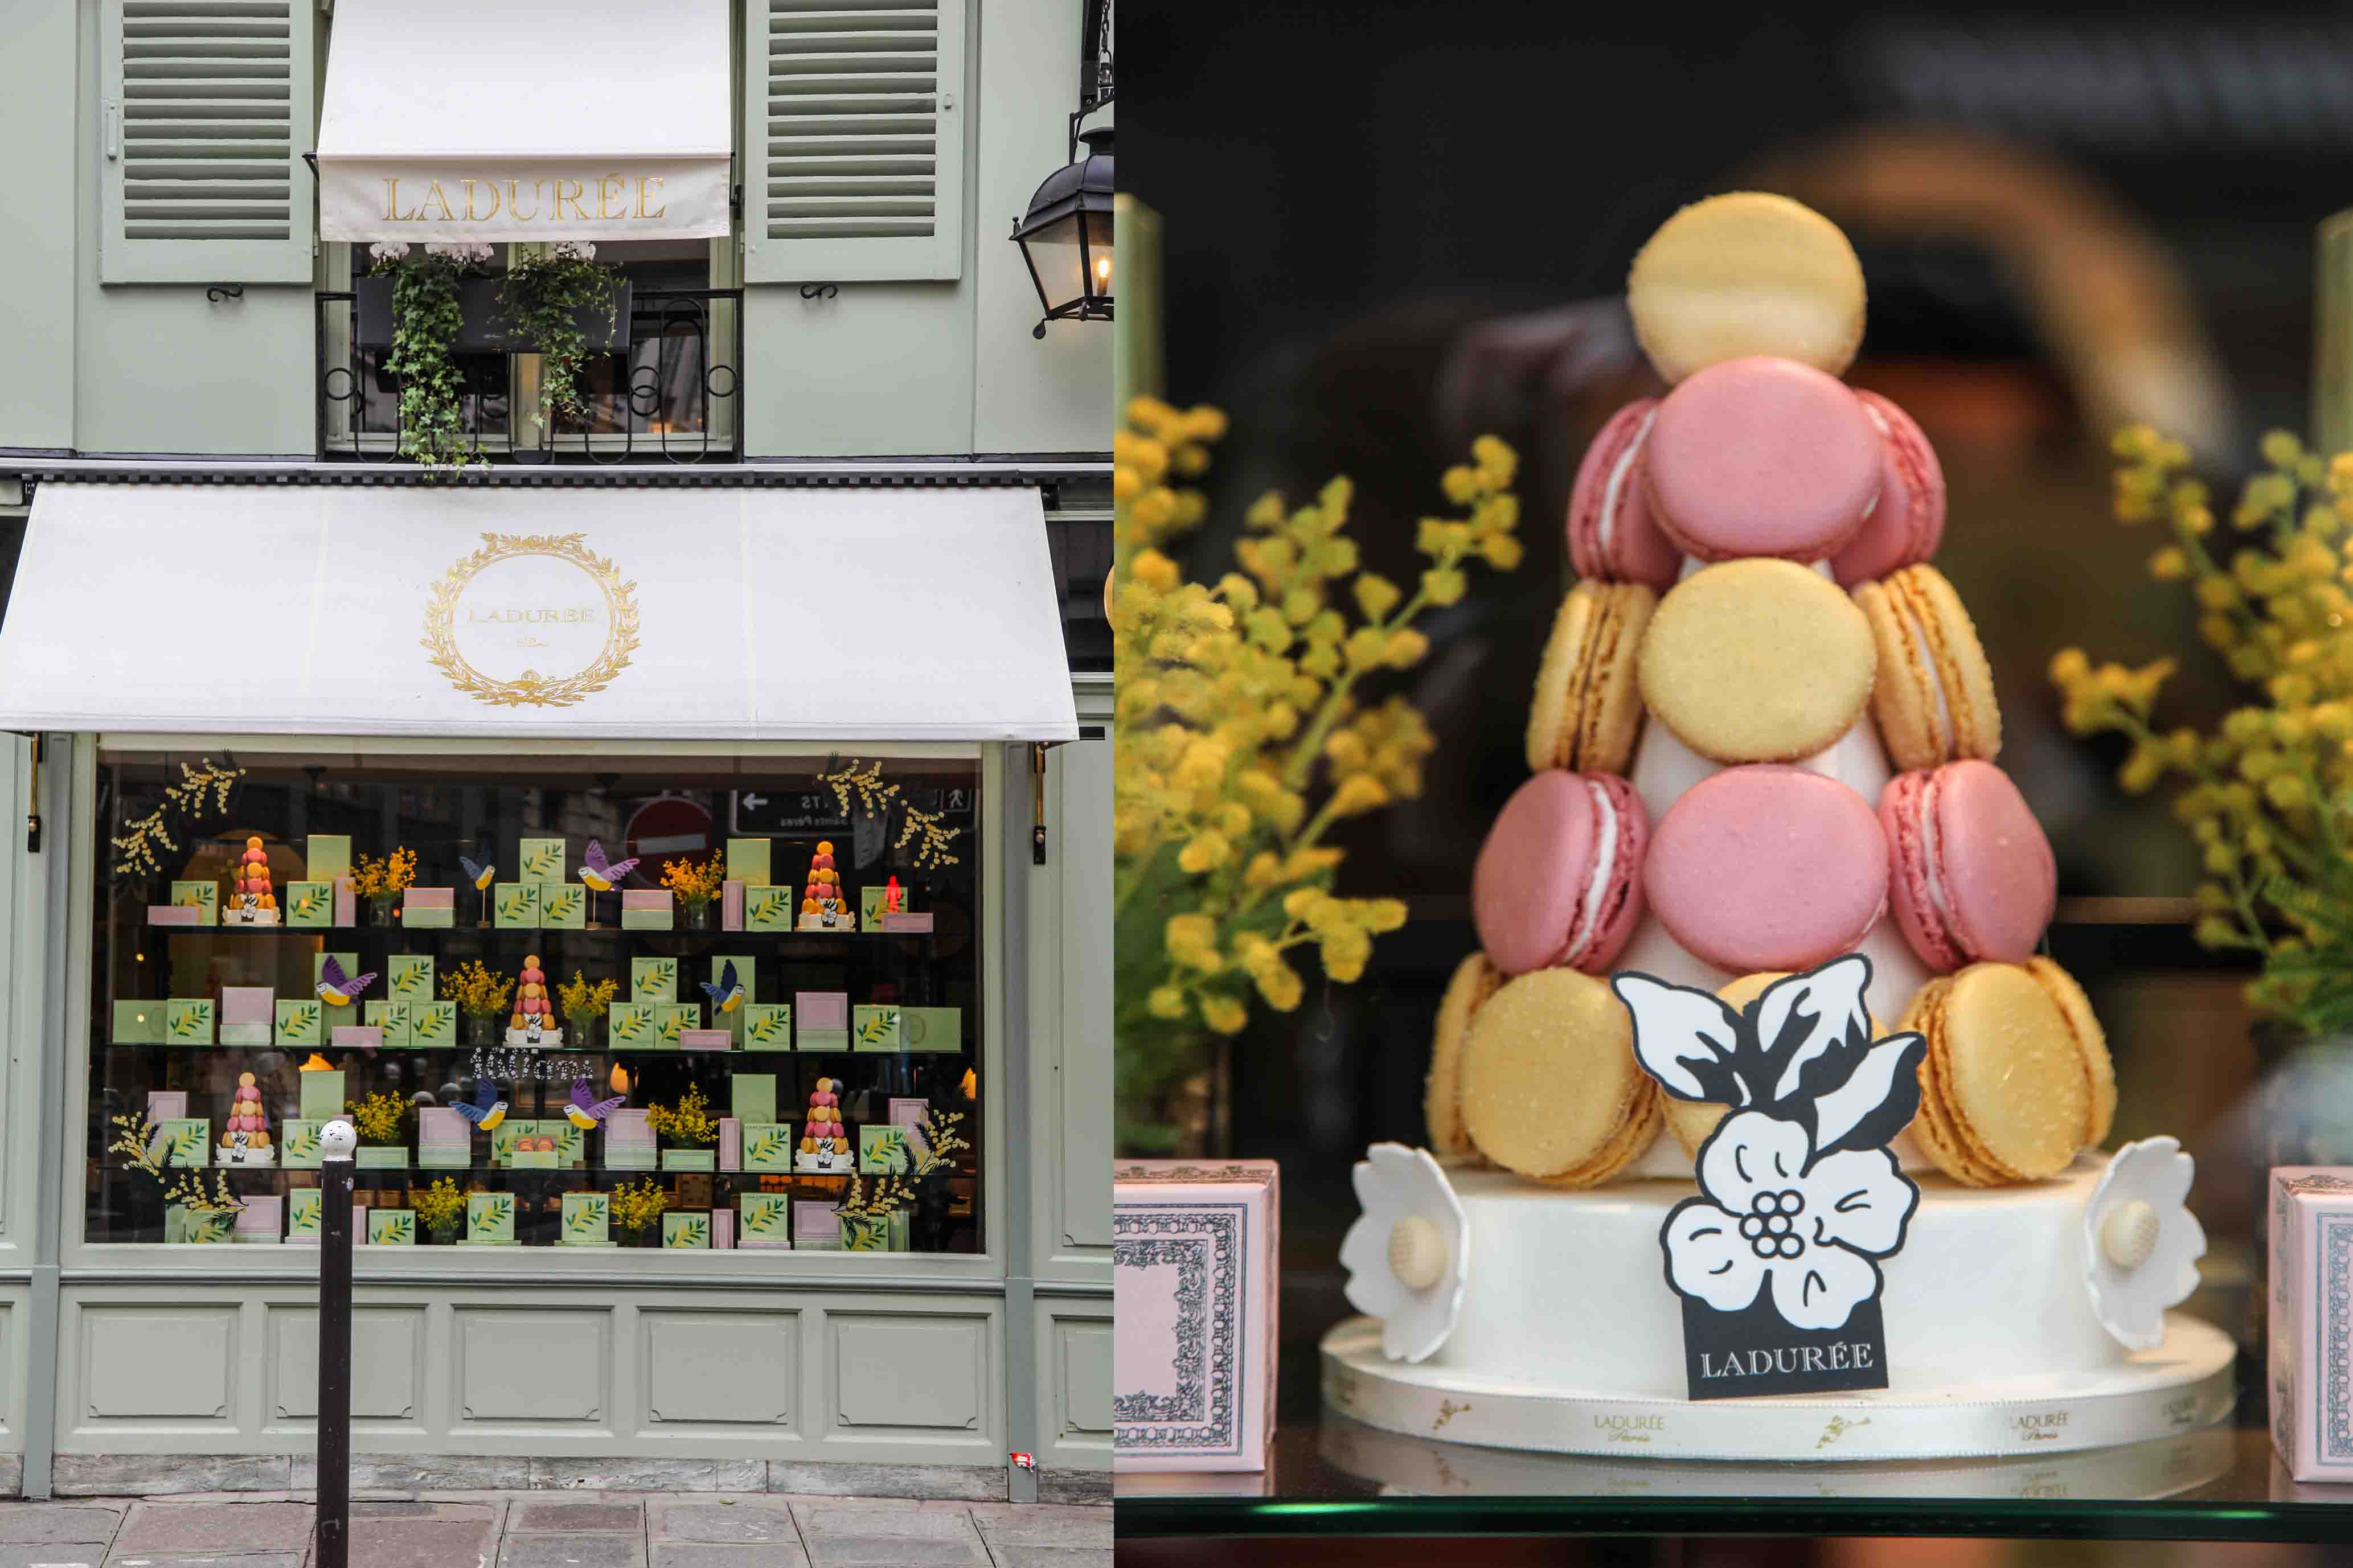 New macarons for the 160th anniversary of Ladurée